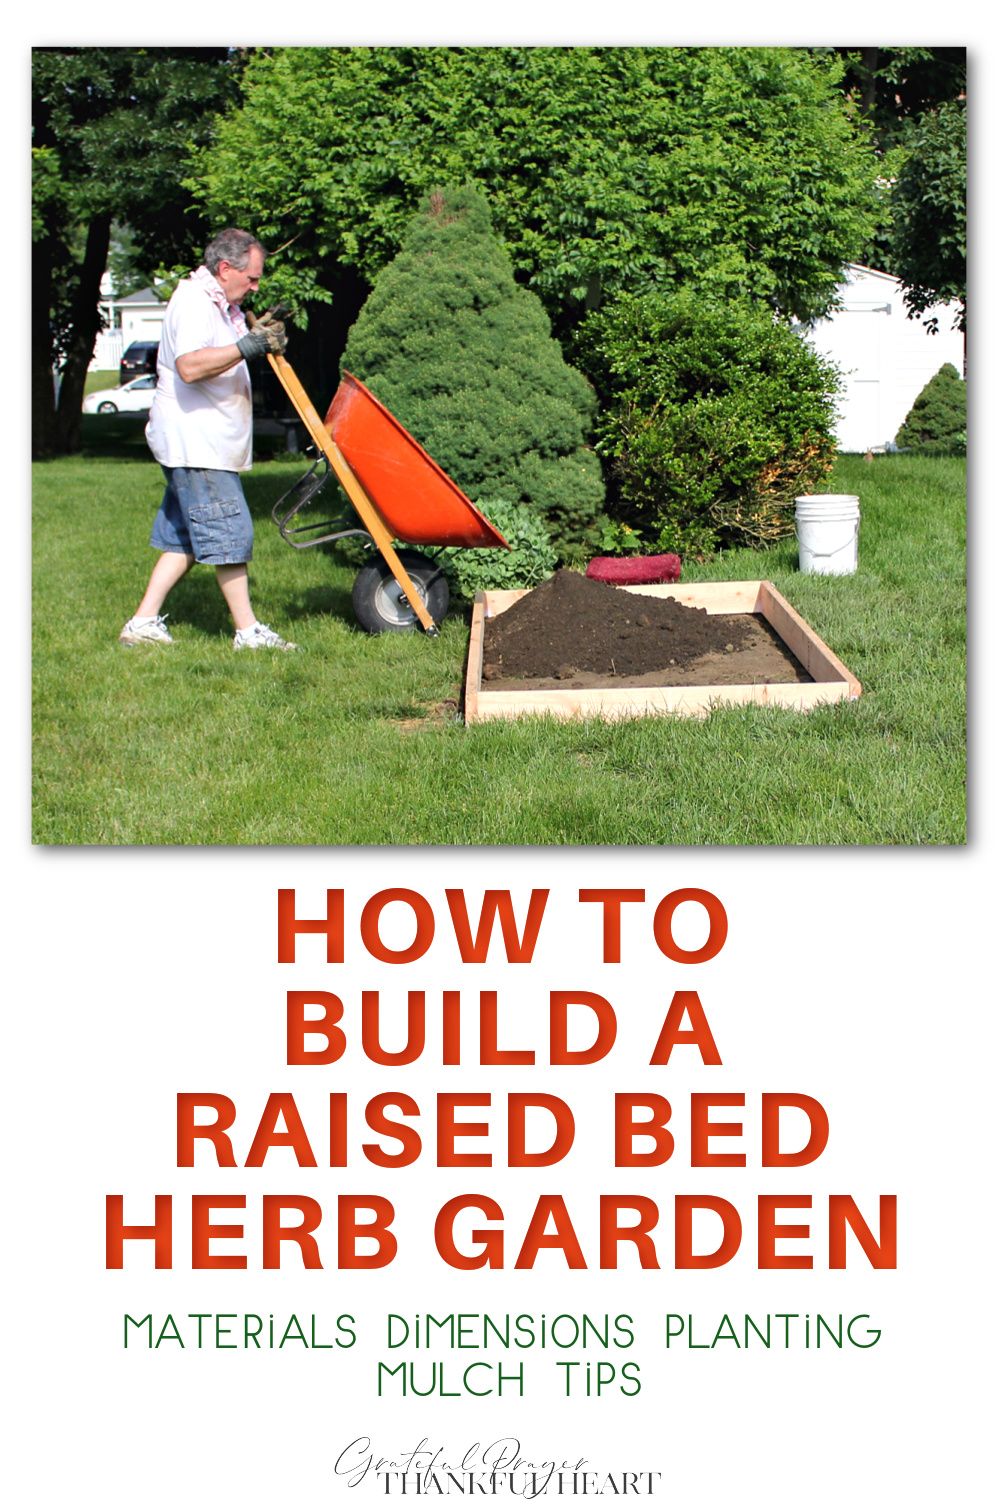 How to build a raised bed herb garden